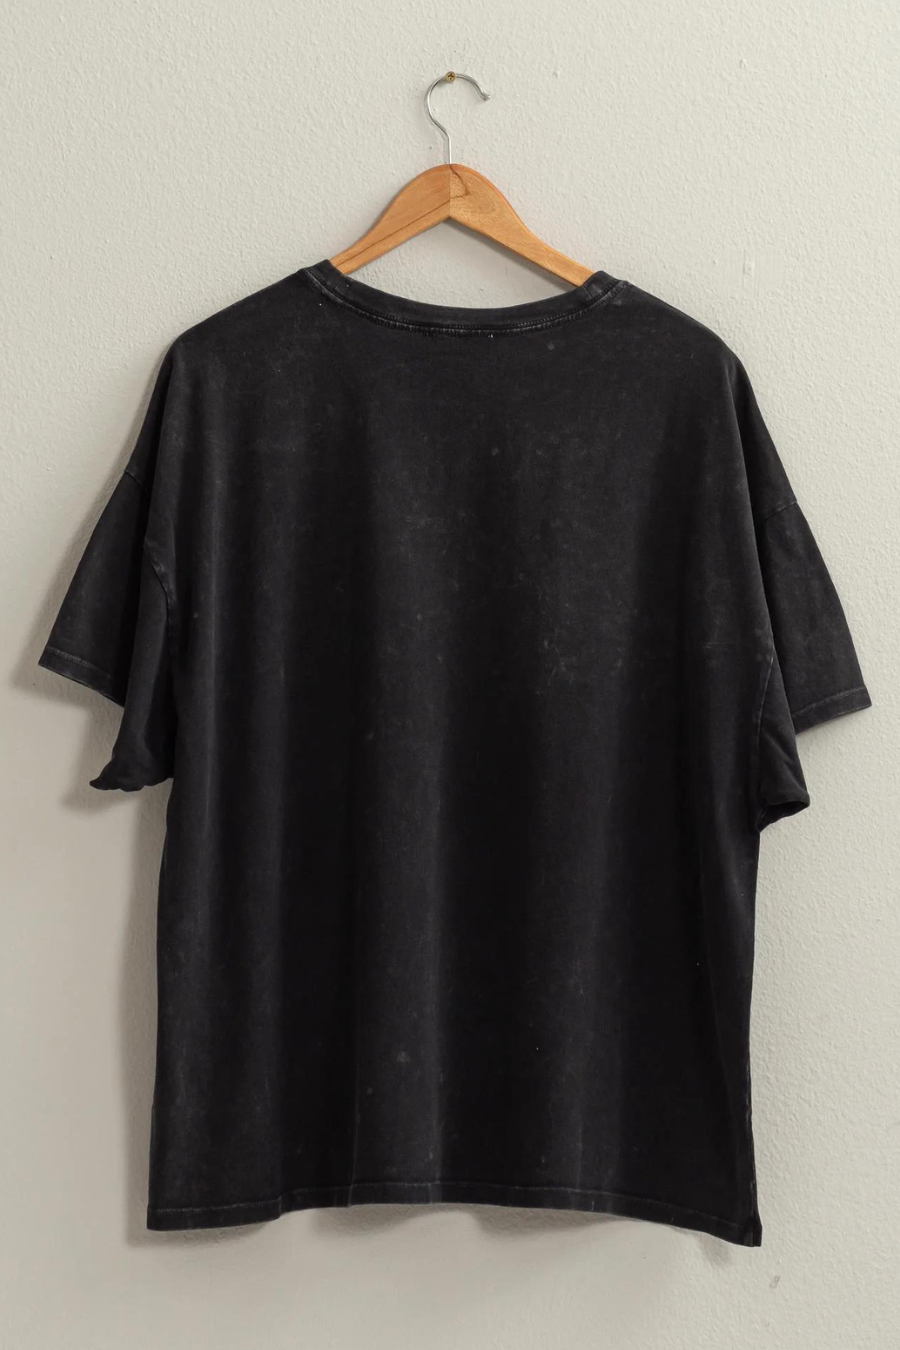 back view of Maisie over sized t shirt in the color black, shirt is hanging on a wooden hanger 